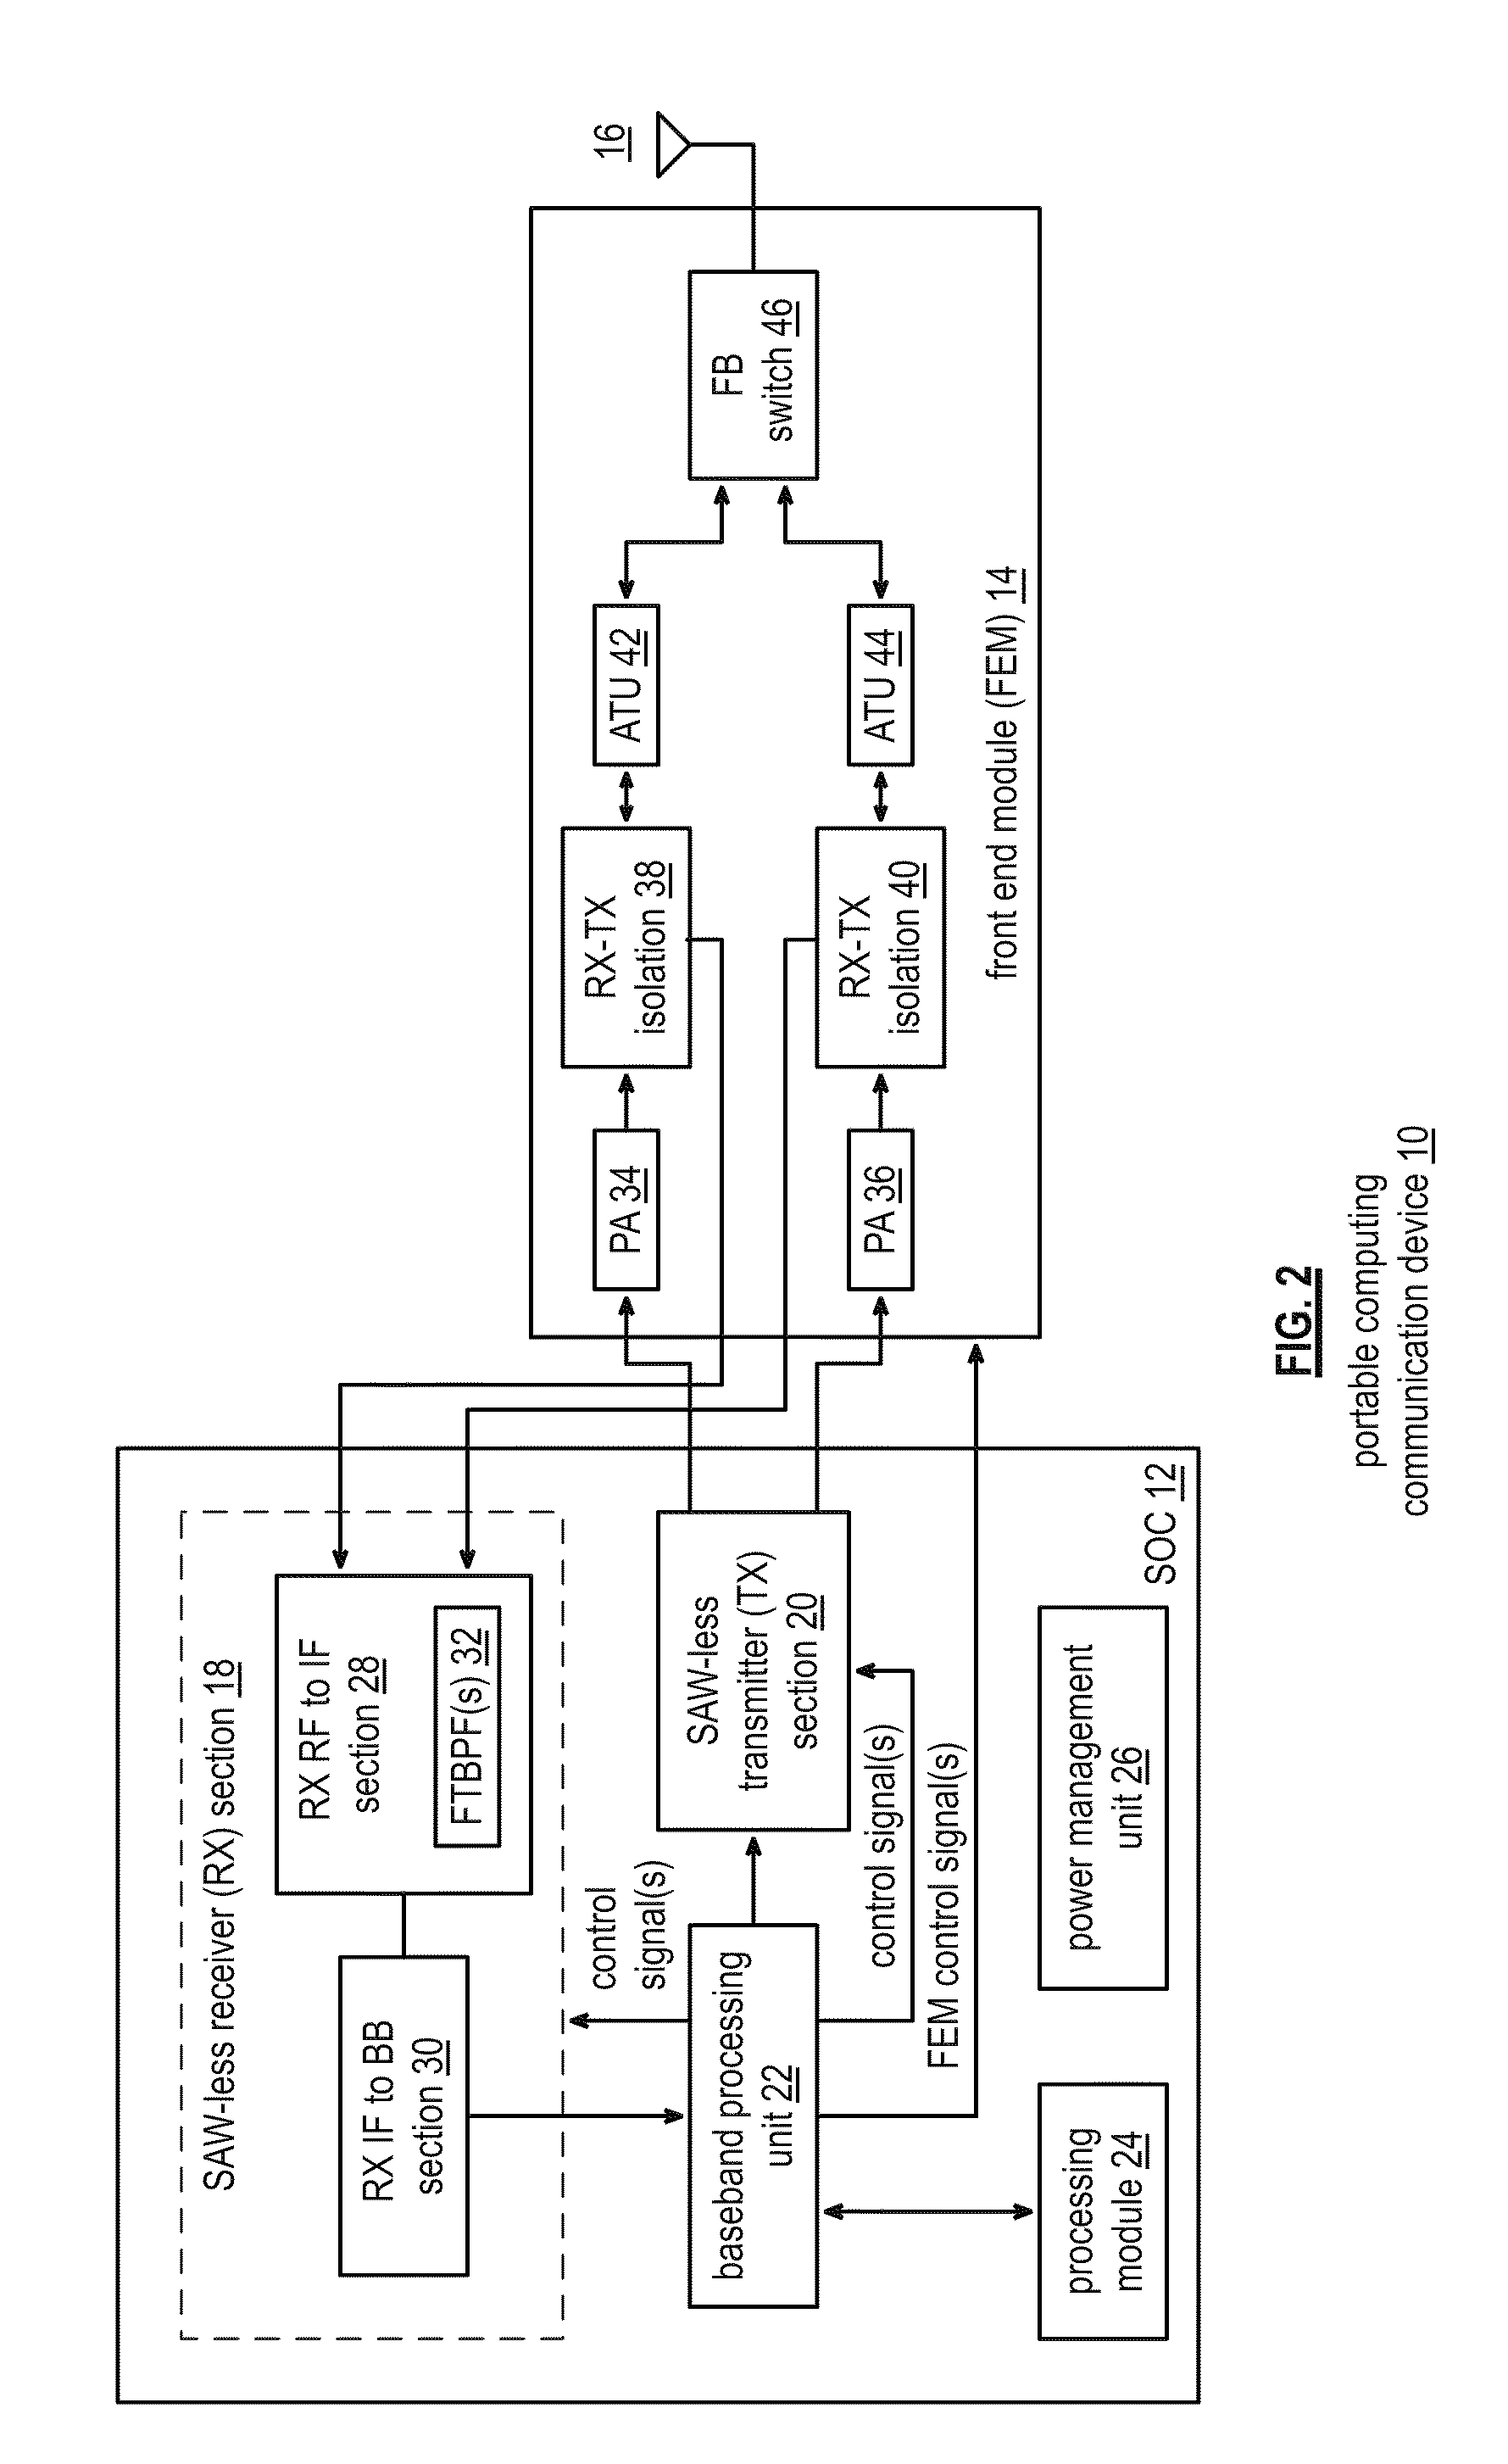 Saw-less receiver with offset RF frequency translated bpf